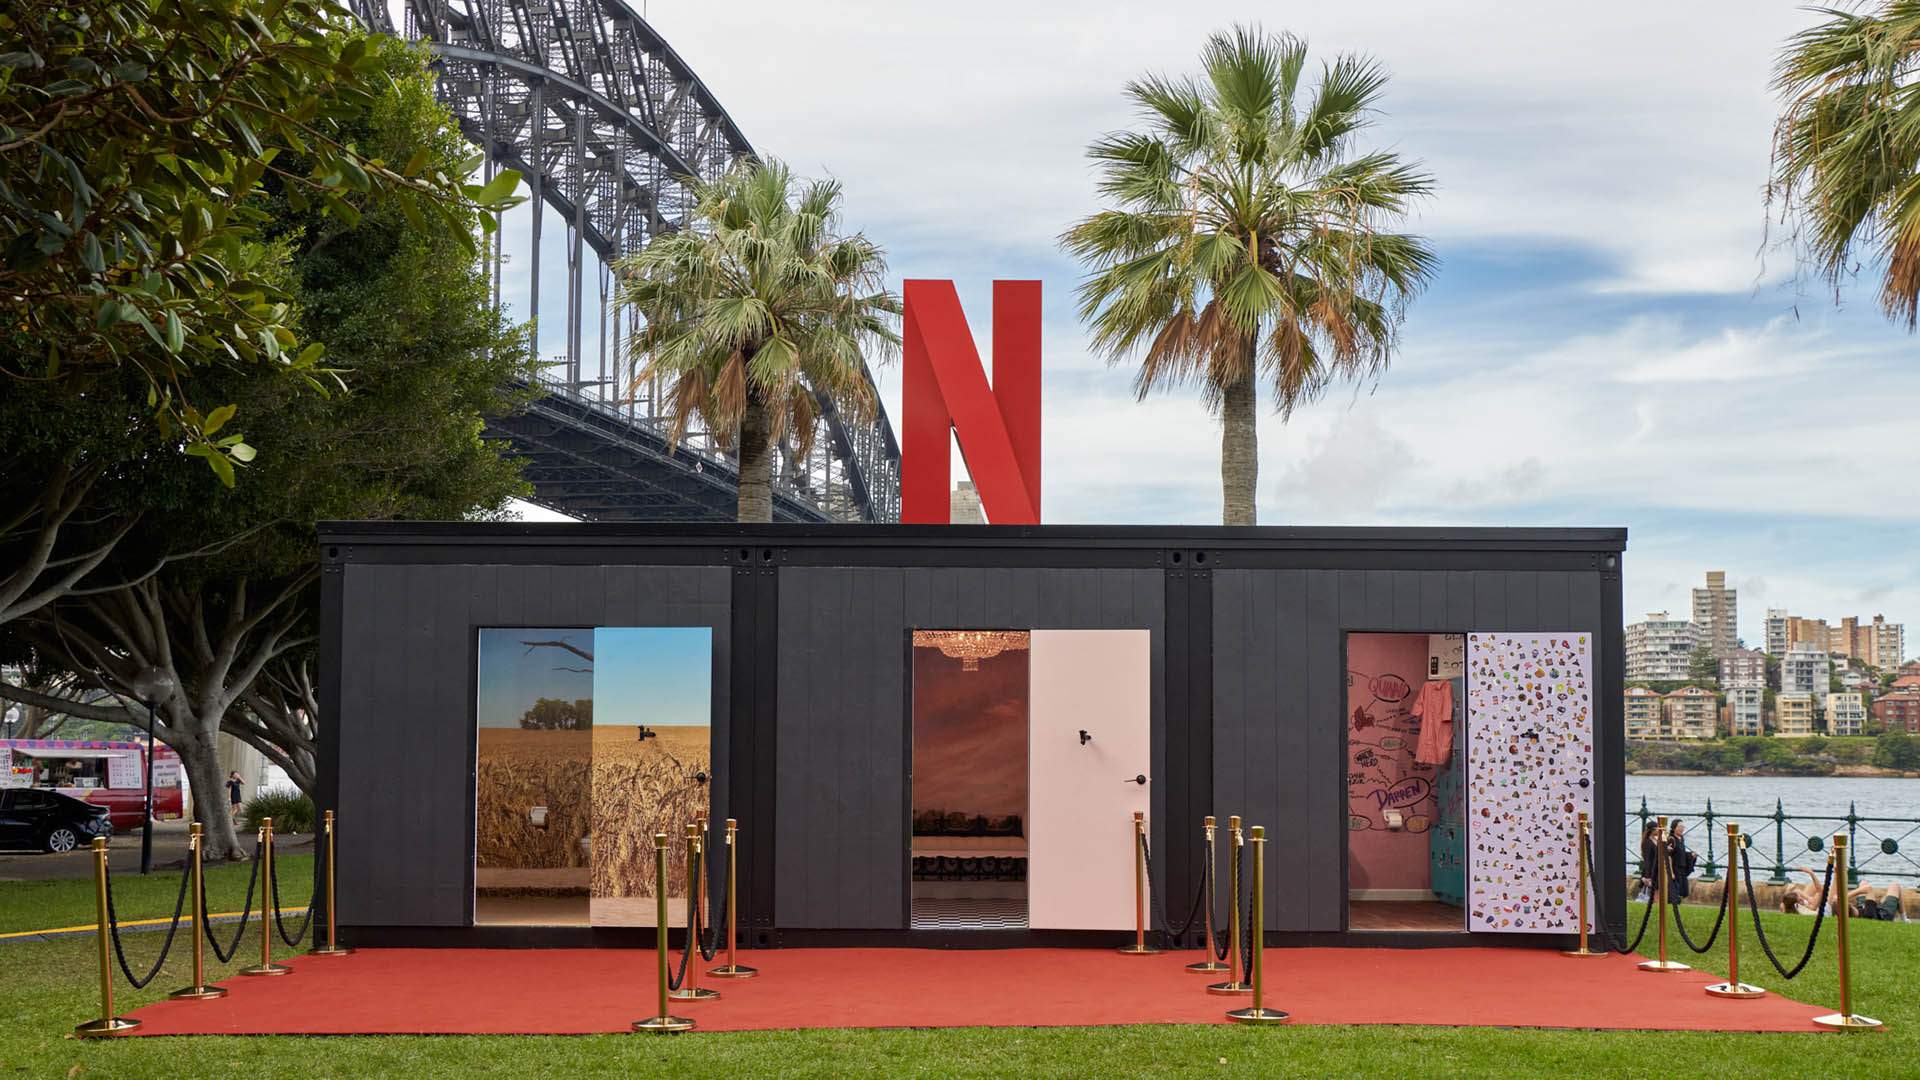 Netflix Has Set Up Toilets Based on 'Squid Game', 'Heartbreak High' and 'Emily in Paris' in Sydney for One Day Only